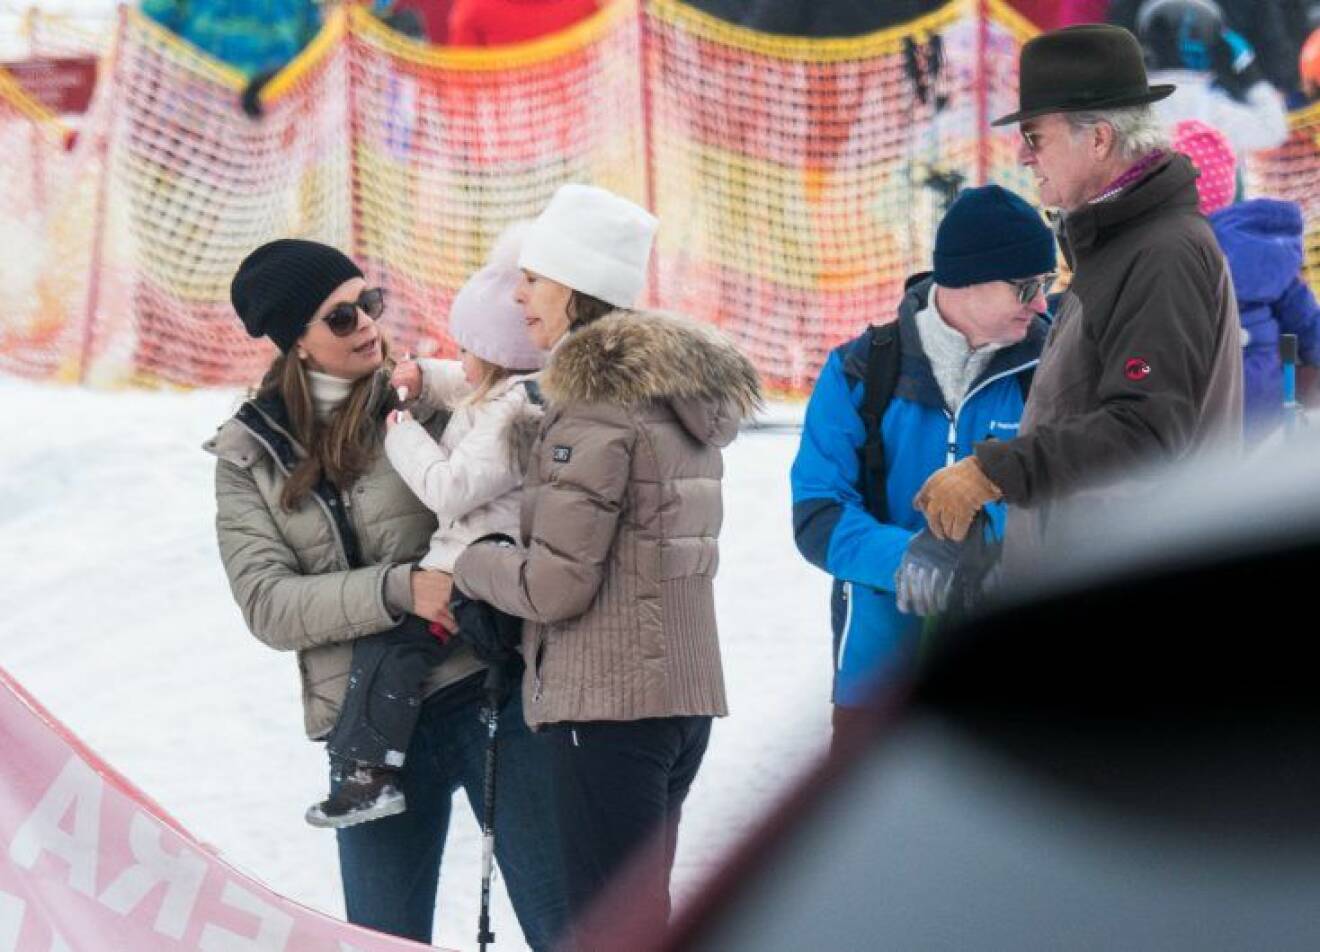 EXCLUSIVE - NO CREDIT - The Royal Swedish family on ski vacation in Switzerland.